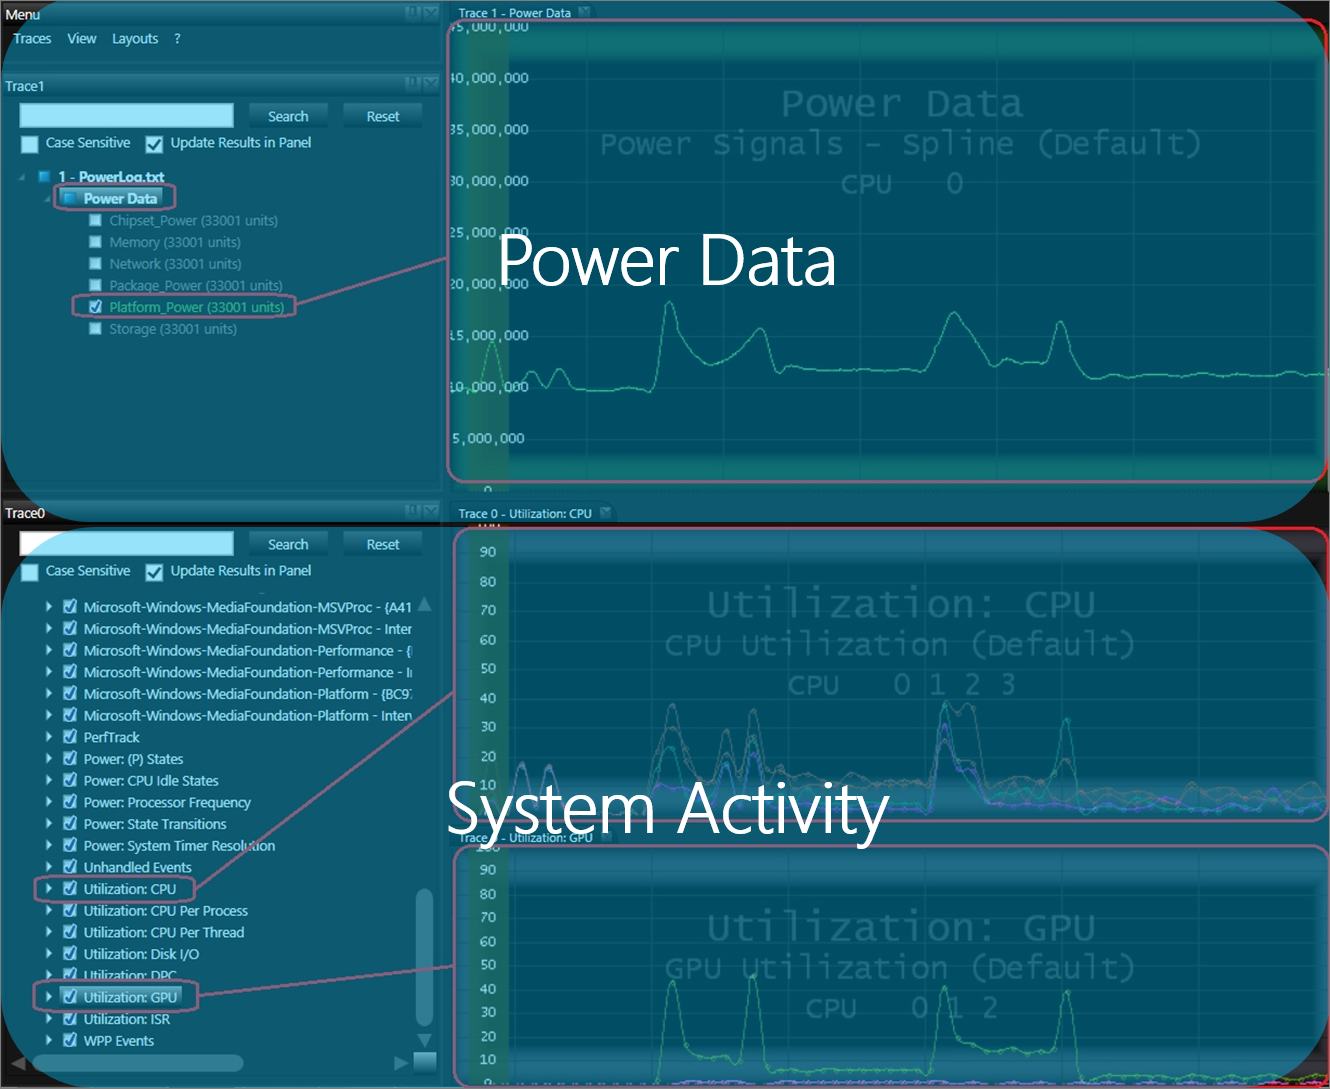 Charts of power data and system activity shown in Media eXperience Analyzer